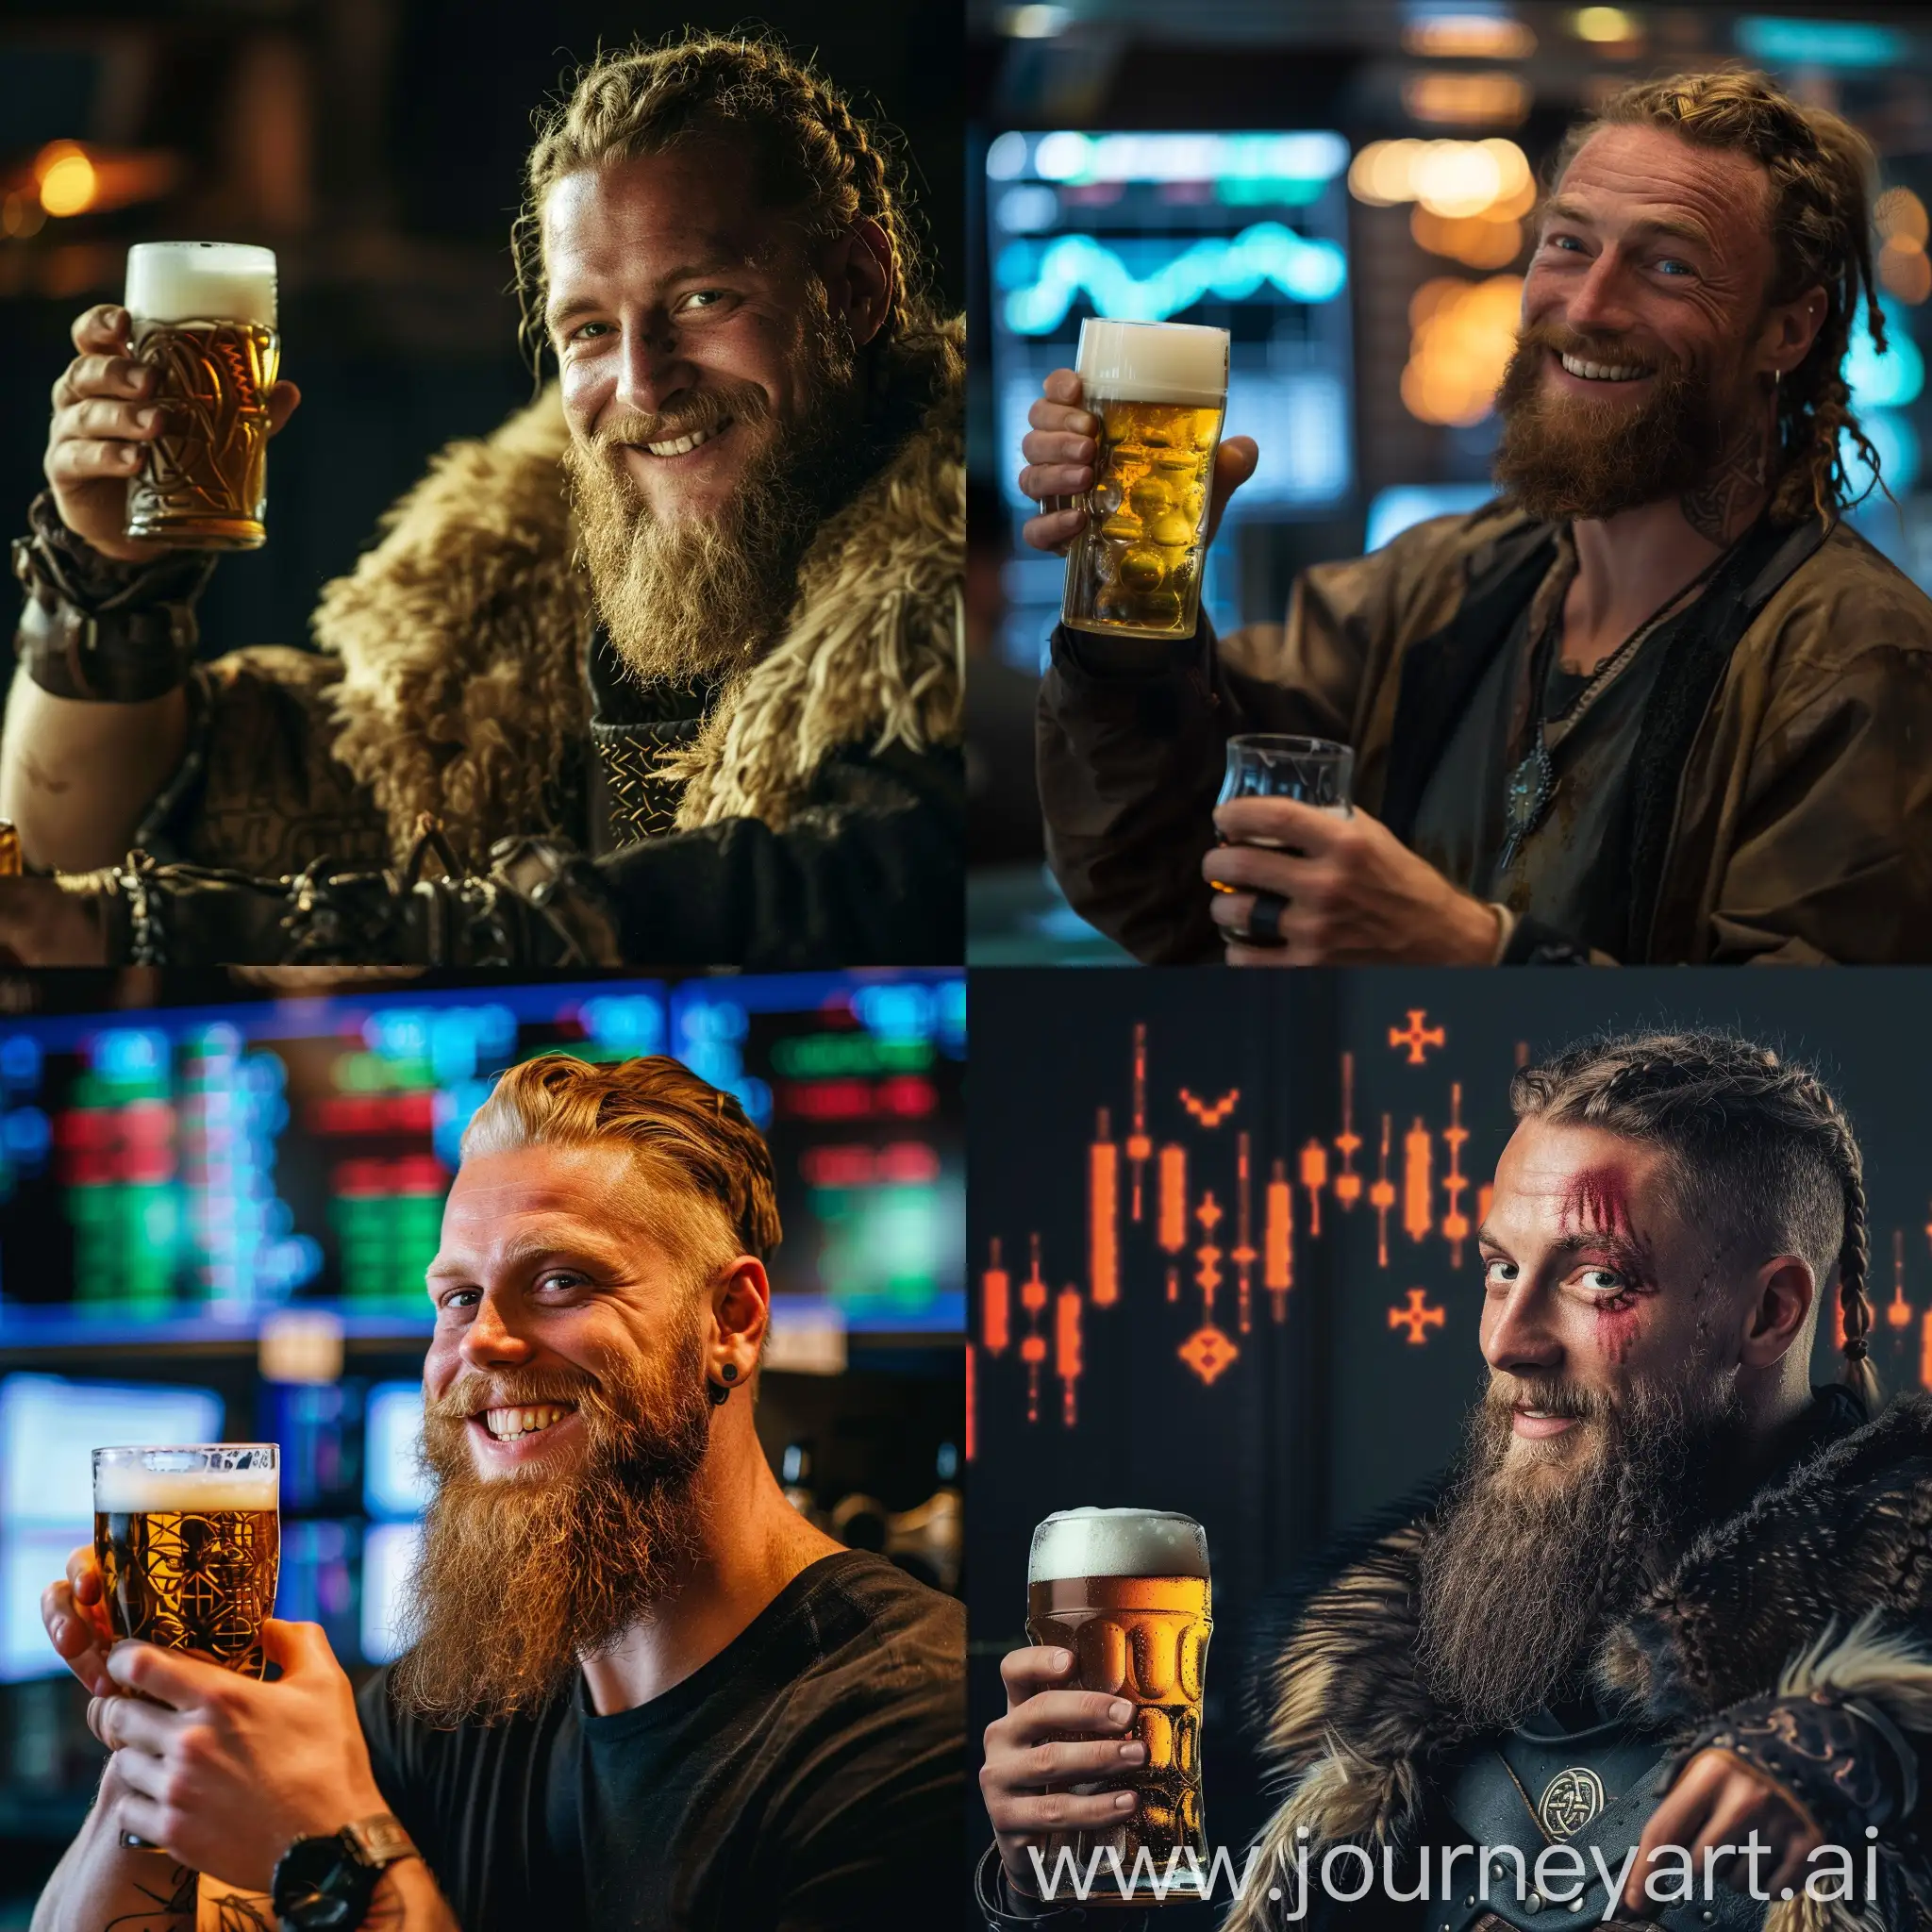 Ragnar-Buys-Stock-Dip-with-Cheerful-Expression-While-Holding-a-Beer